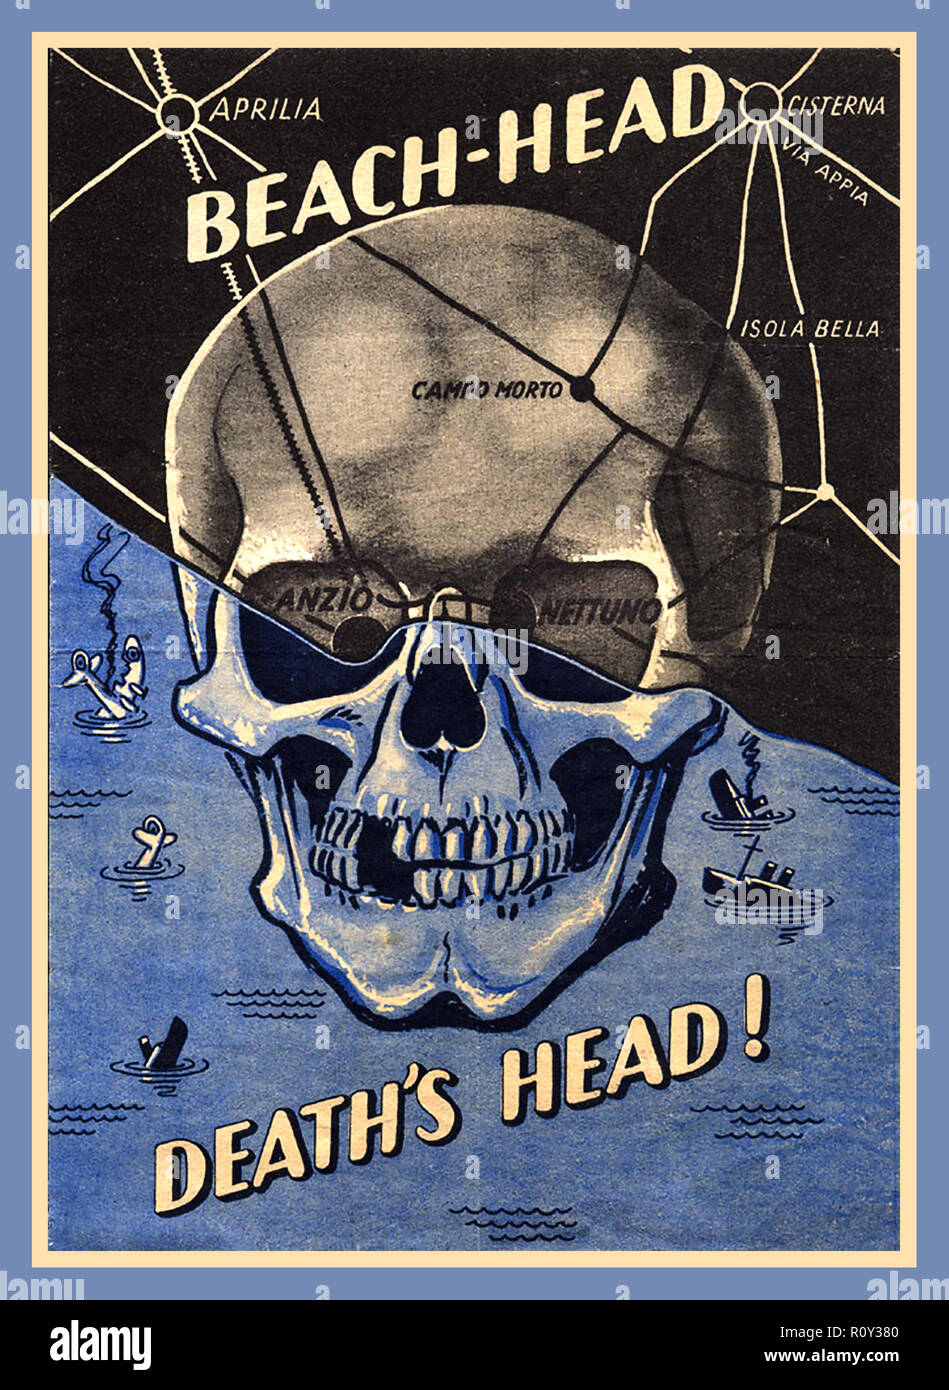 ANZIO ALLIED INVASION Nazi Germany WW2 Propaganda poster 'Beach-Head' 'Death's Head'  warning Allied Soldiers that death awaits them at the World War 2 Anzio beach head Italian invasion Italy Stock Photo